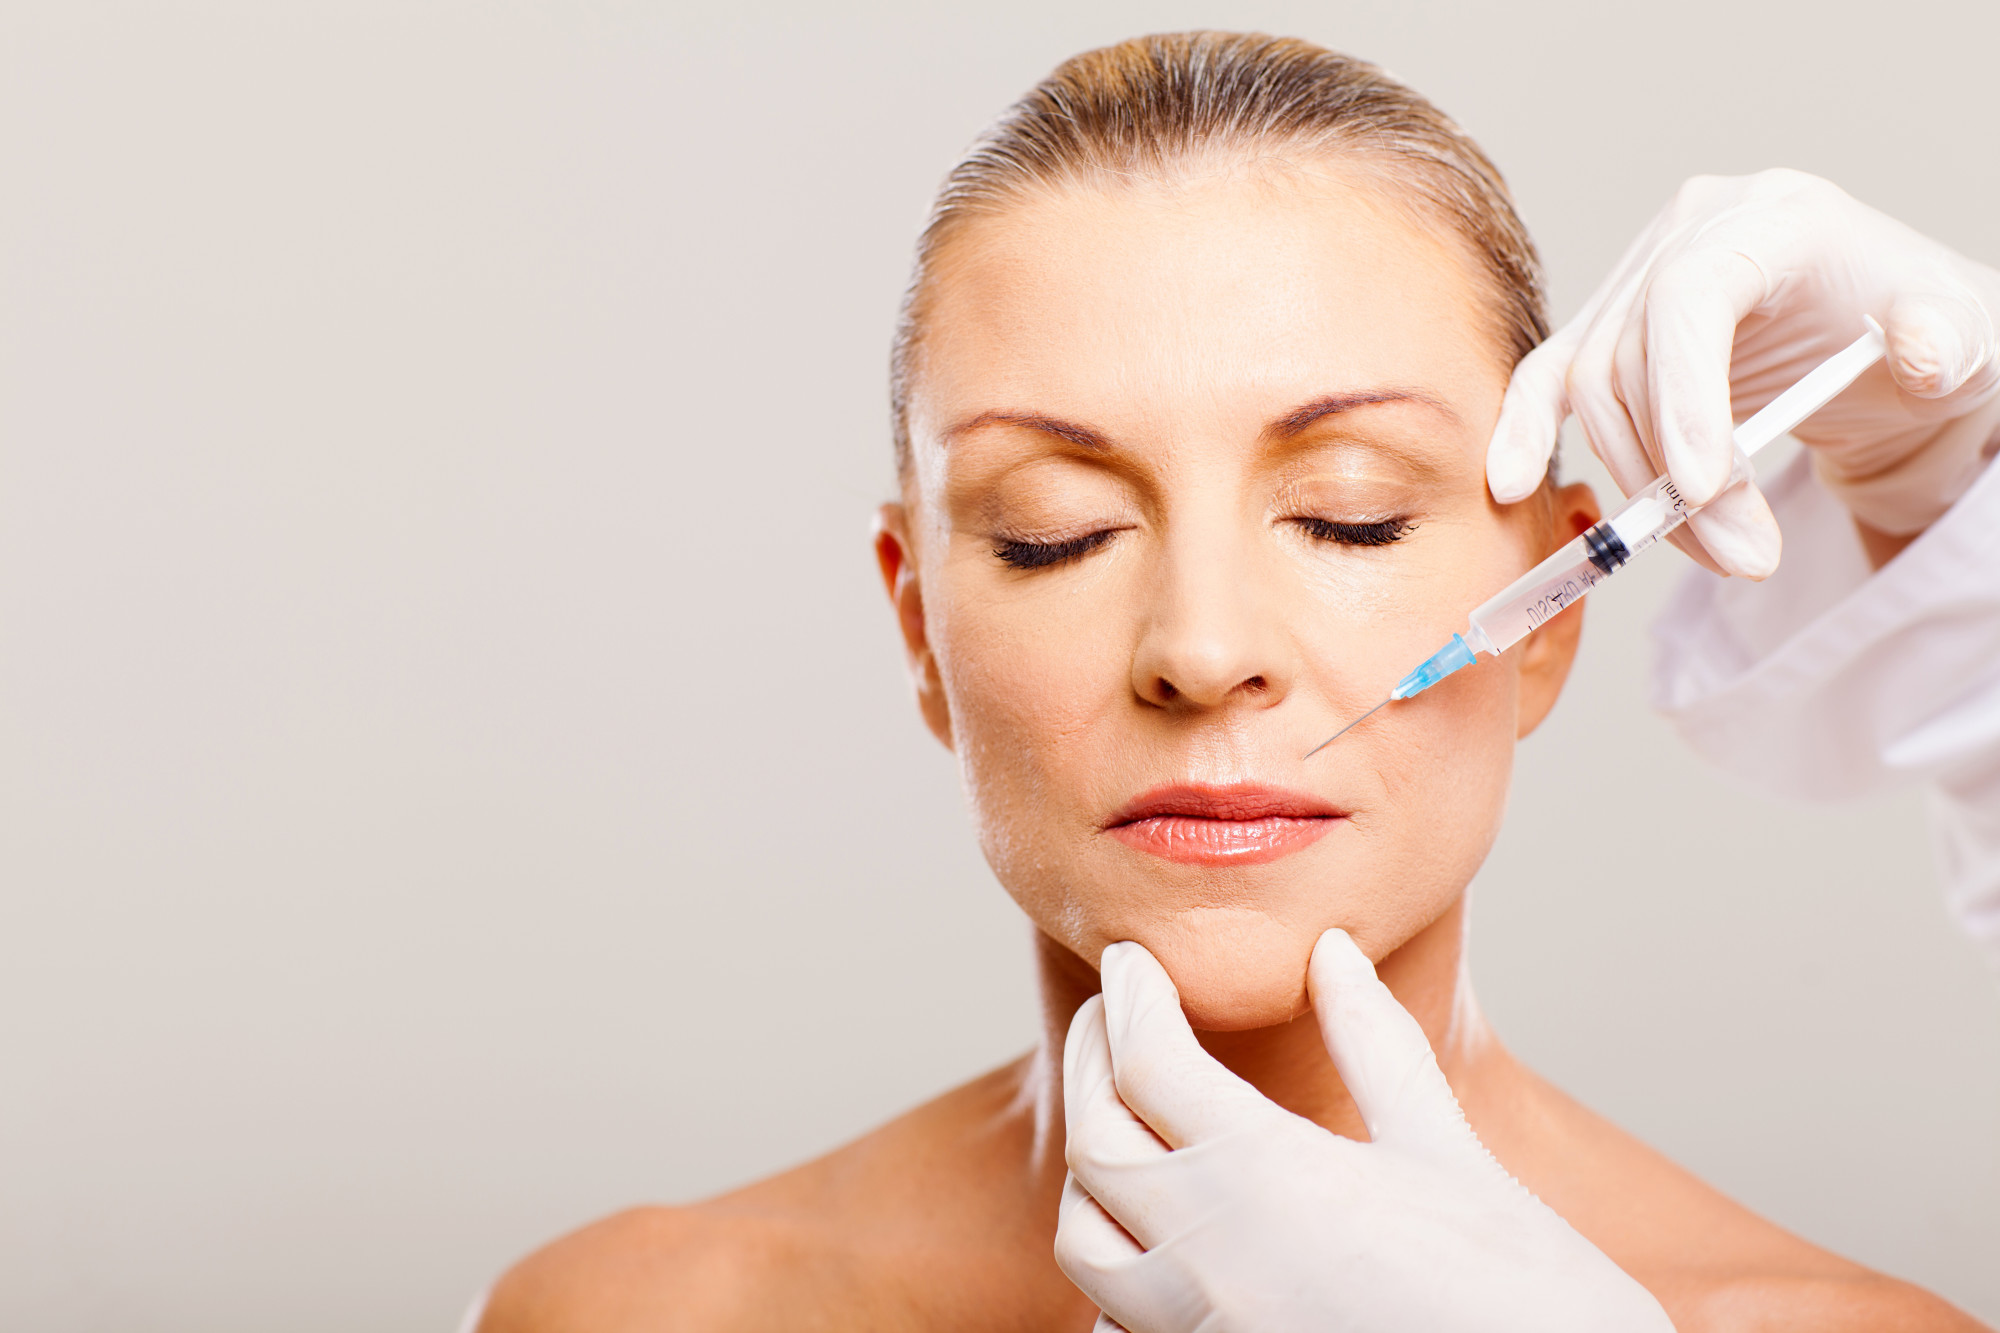 XEOMIN-injections MEDICAL SPA IN RALEIGH NC